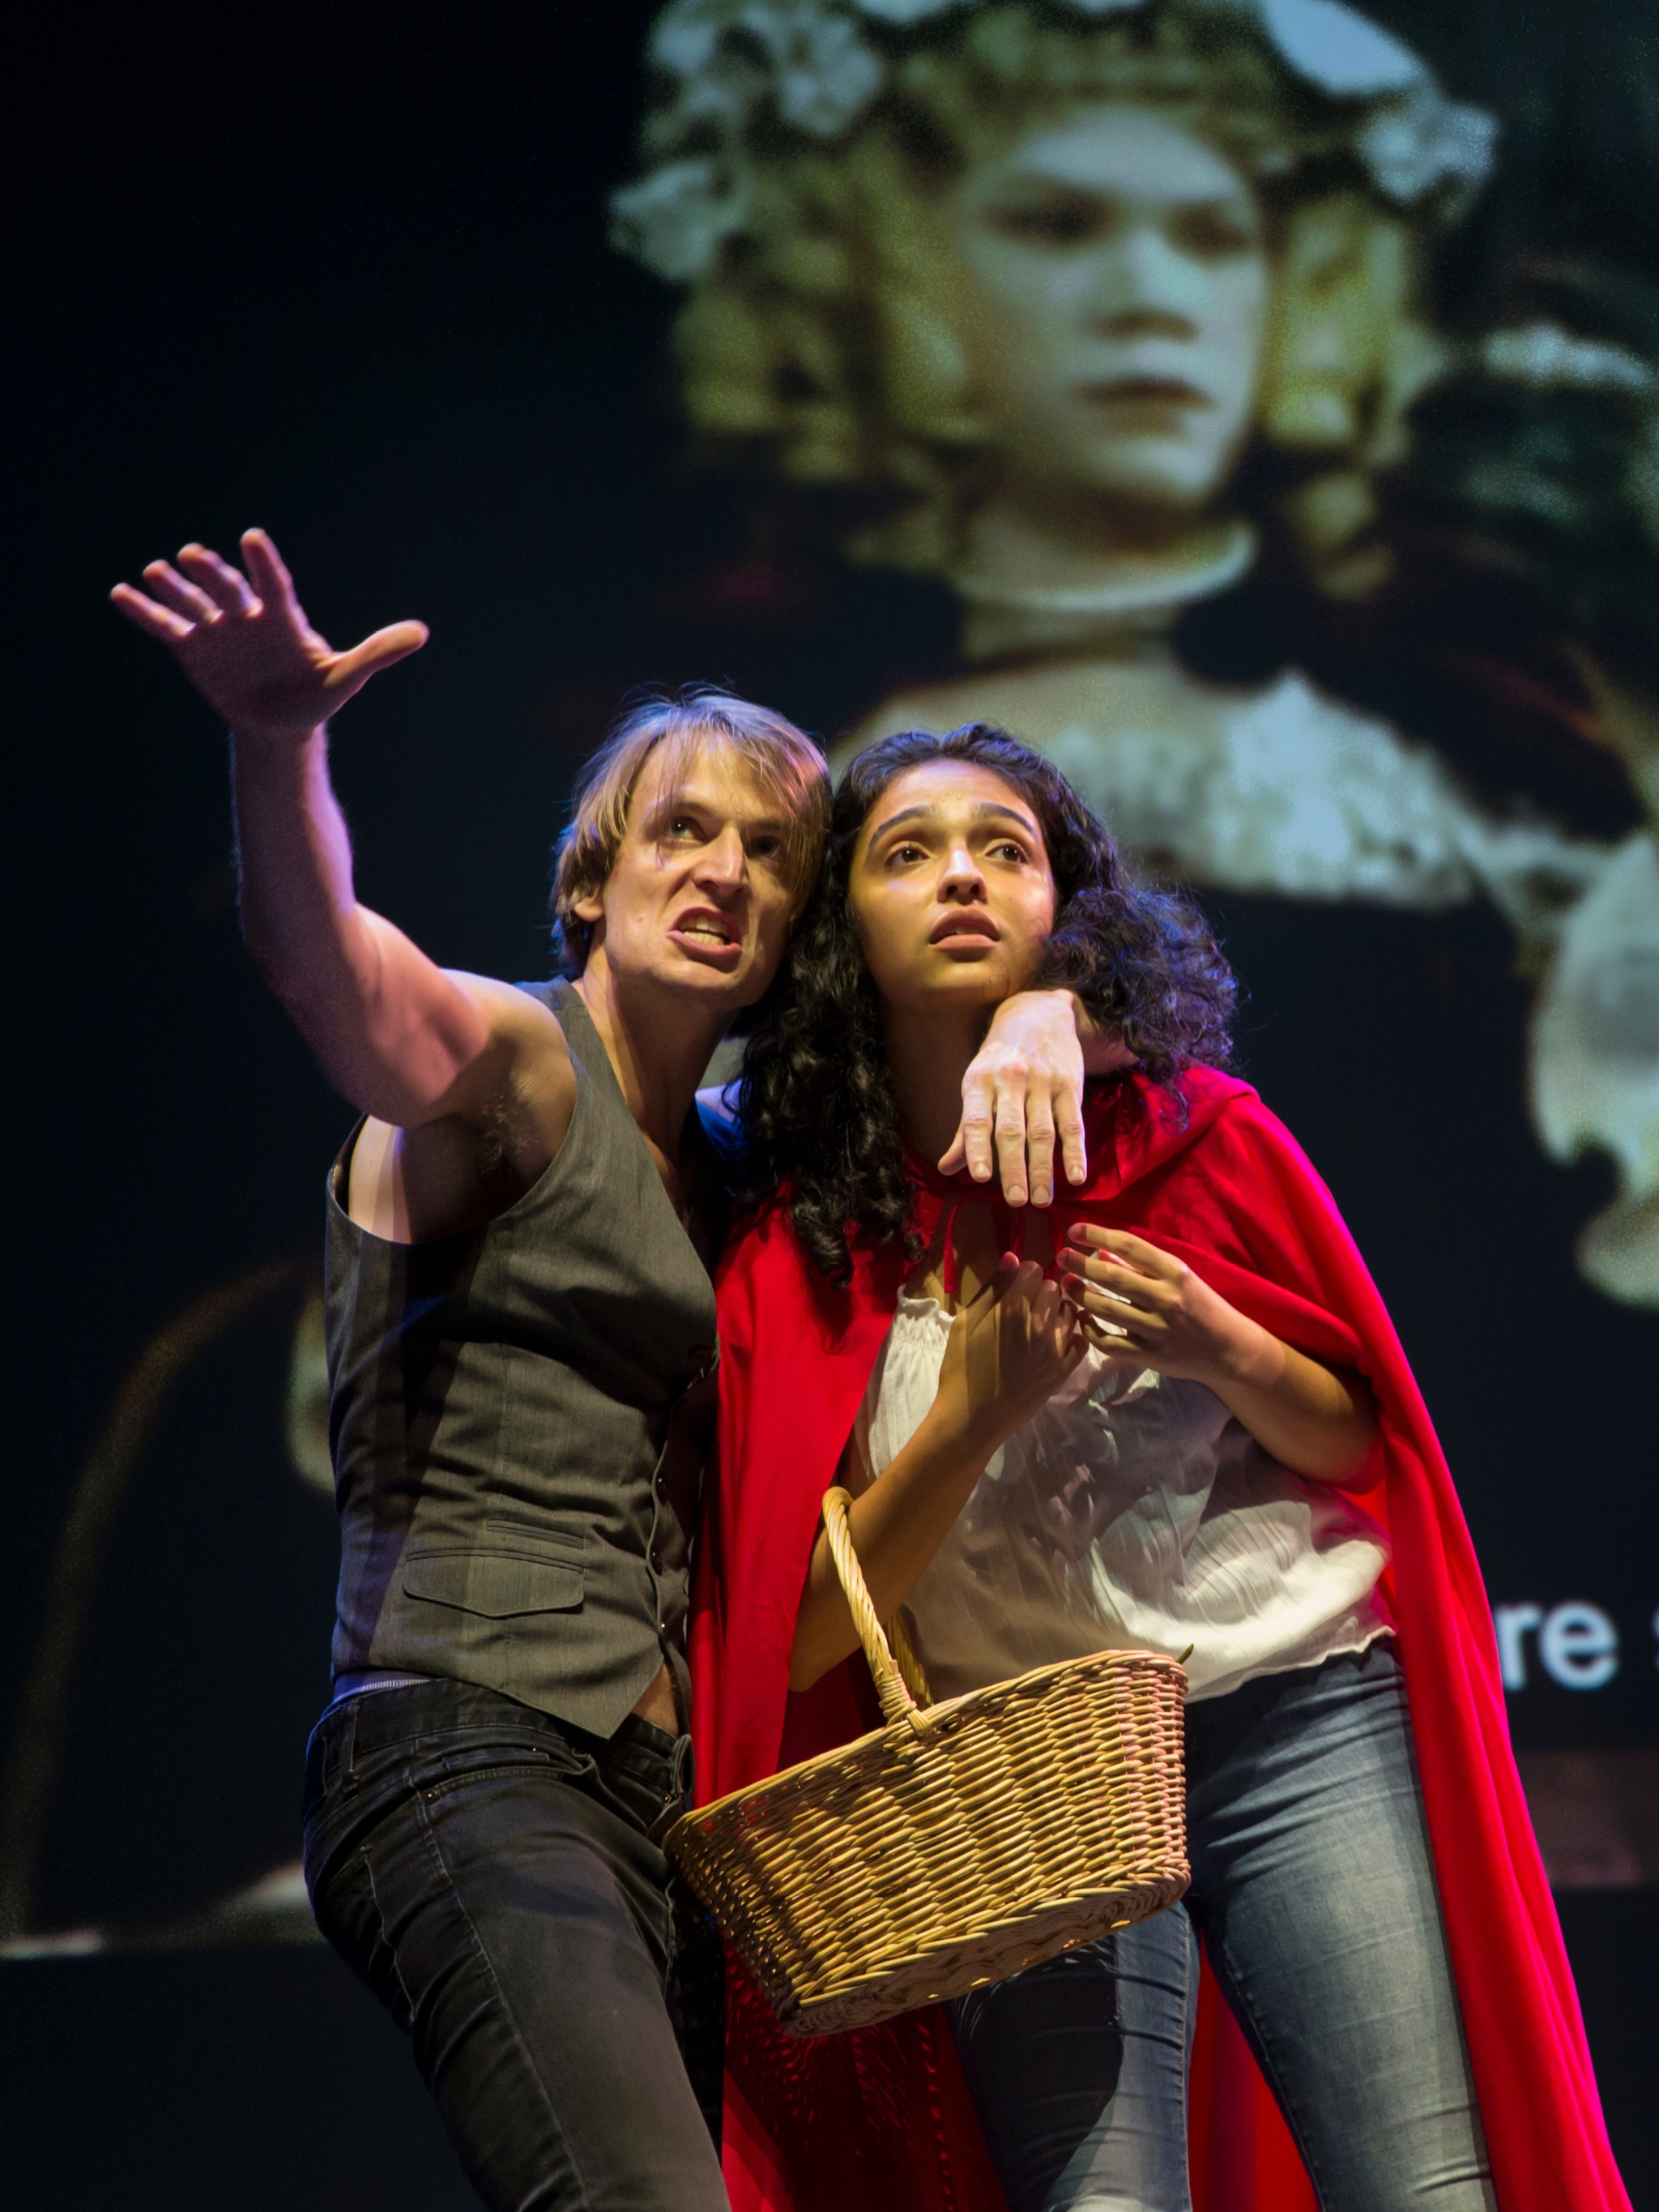 Two Deaf performers, a young man and woman, stand closely together on a stage with a video projection behind them. The white man, wearing a dark gray vest, has one arm around the shoulders and neck of the other performer while stretching his other arm out toward us. The young Hispanic woman, with curly dark hair to her shoulders, wears a red riding hood cloak and holds a basket in the crook of her arm. The video projection shows a period scene from a performance of Into the Woods, with the subtitled words “singing sweetly” visible behind the performers. 